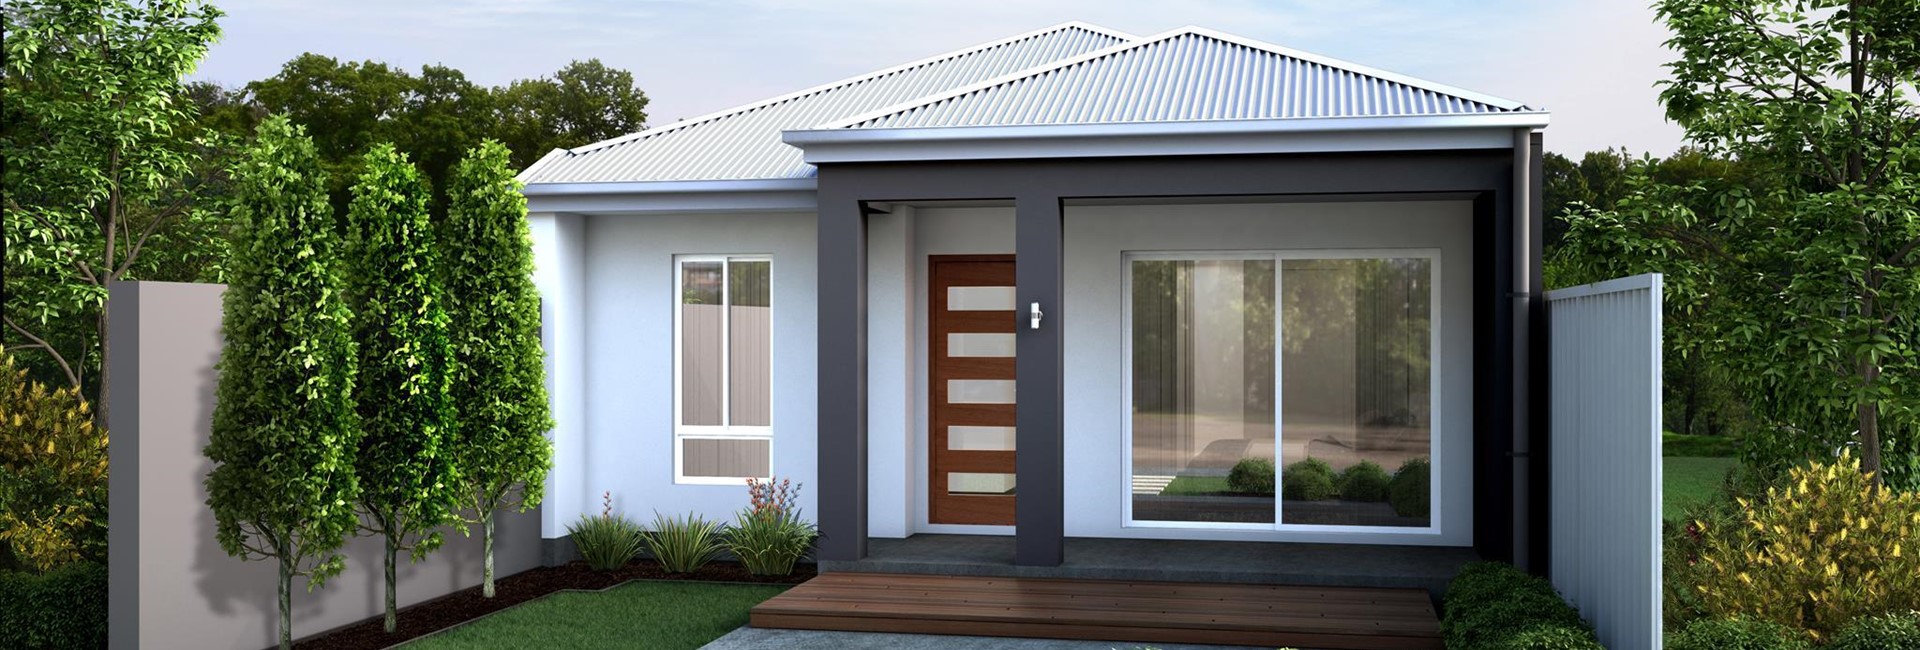 Achieve The Best With Small Block House Plans To Suit Small And Narrow Blocks